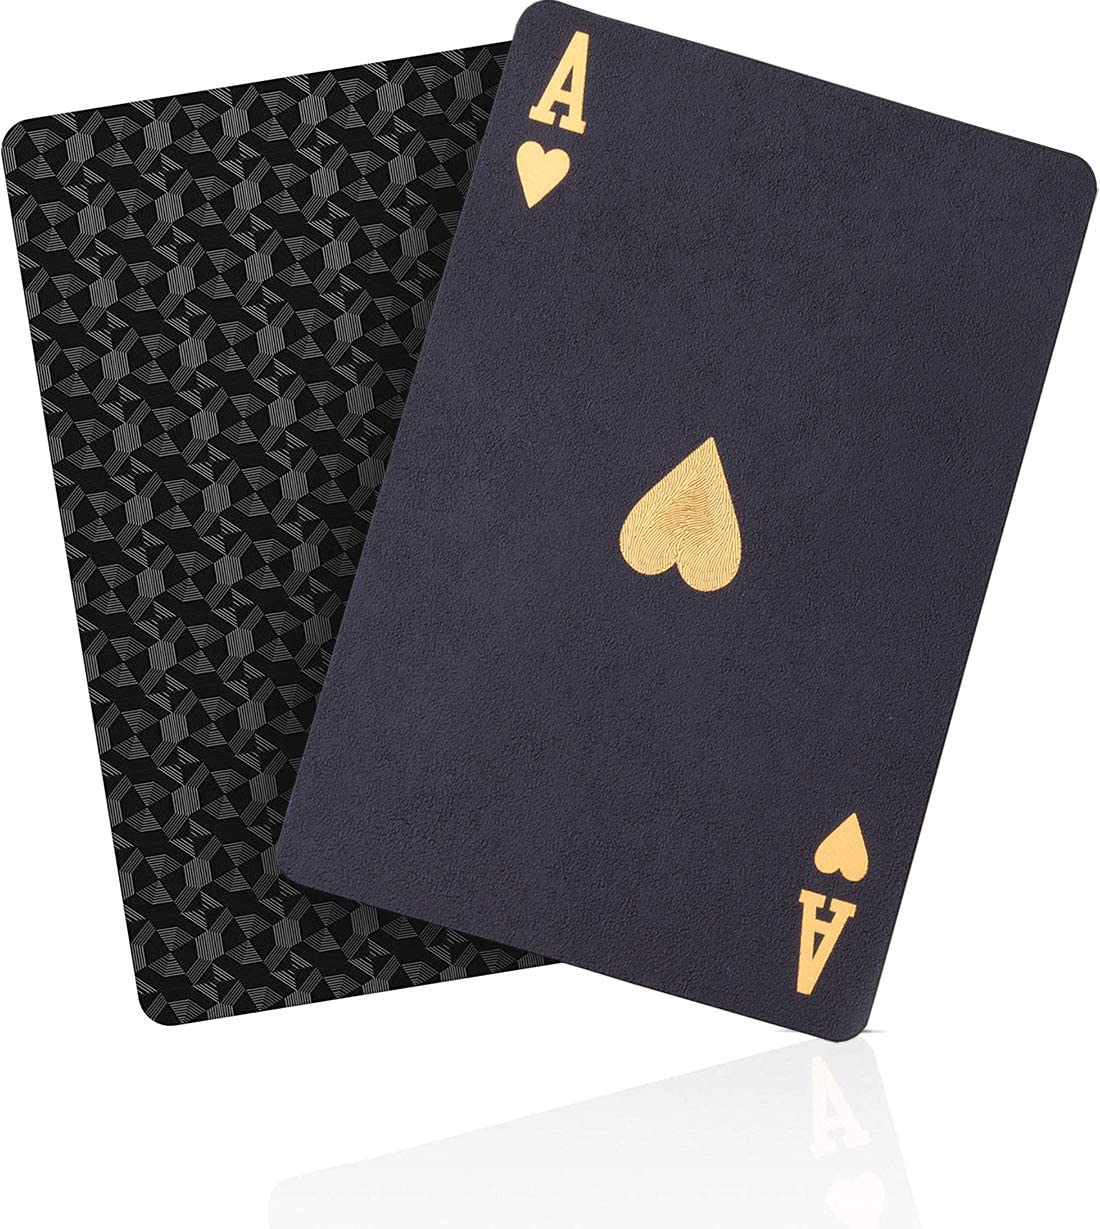 Waterproof Playing Cards